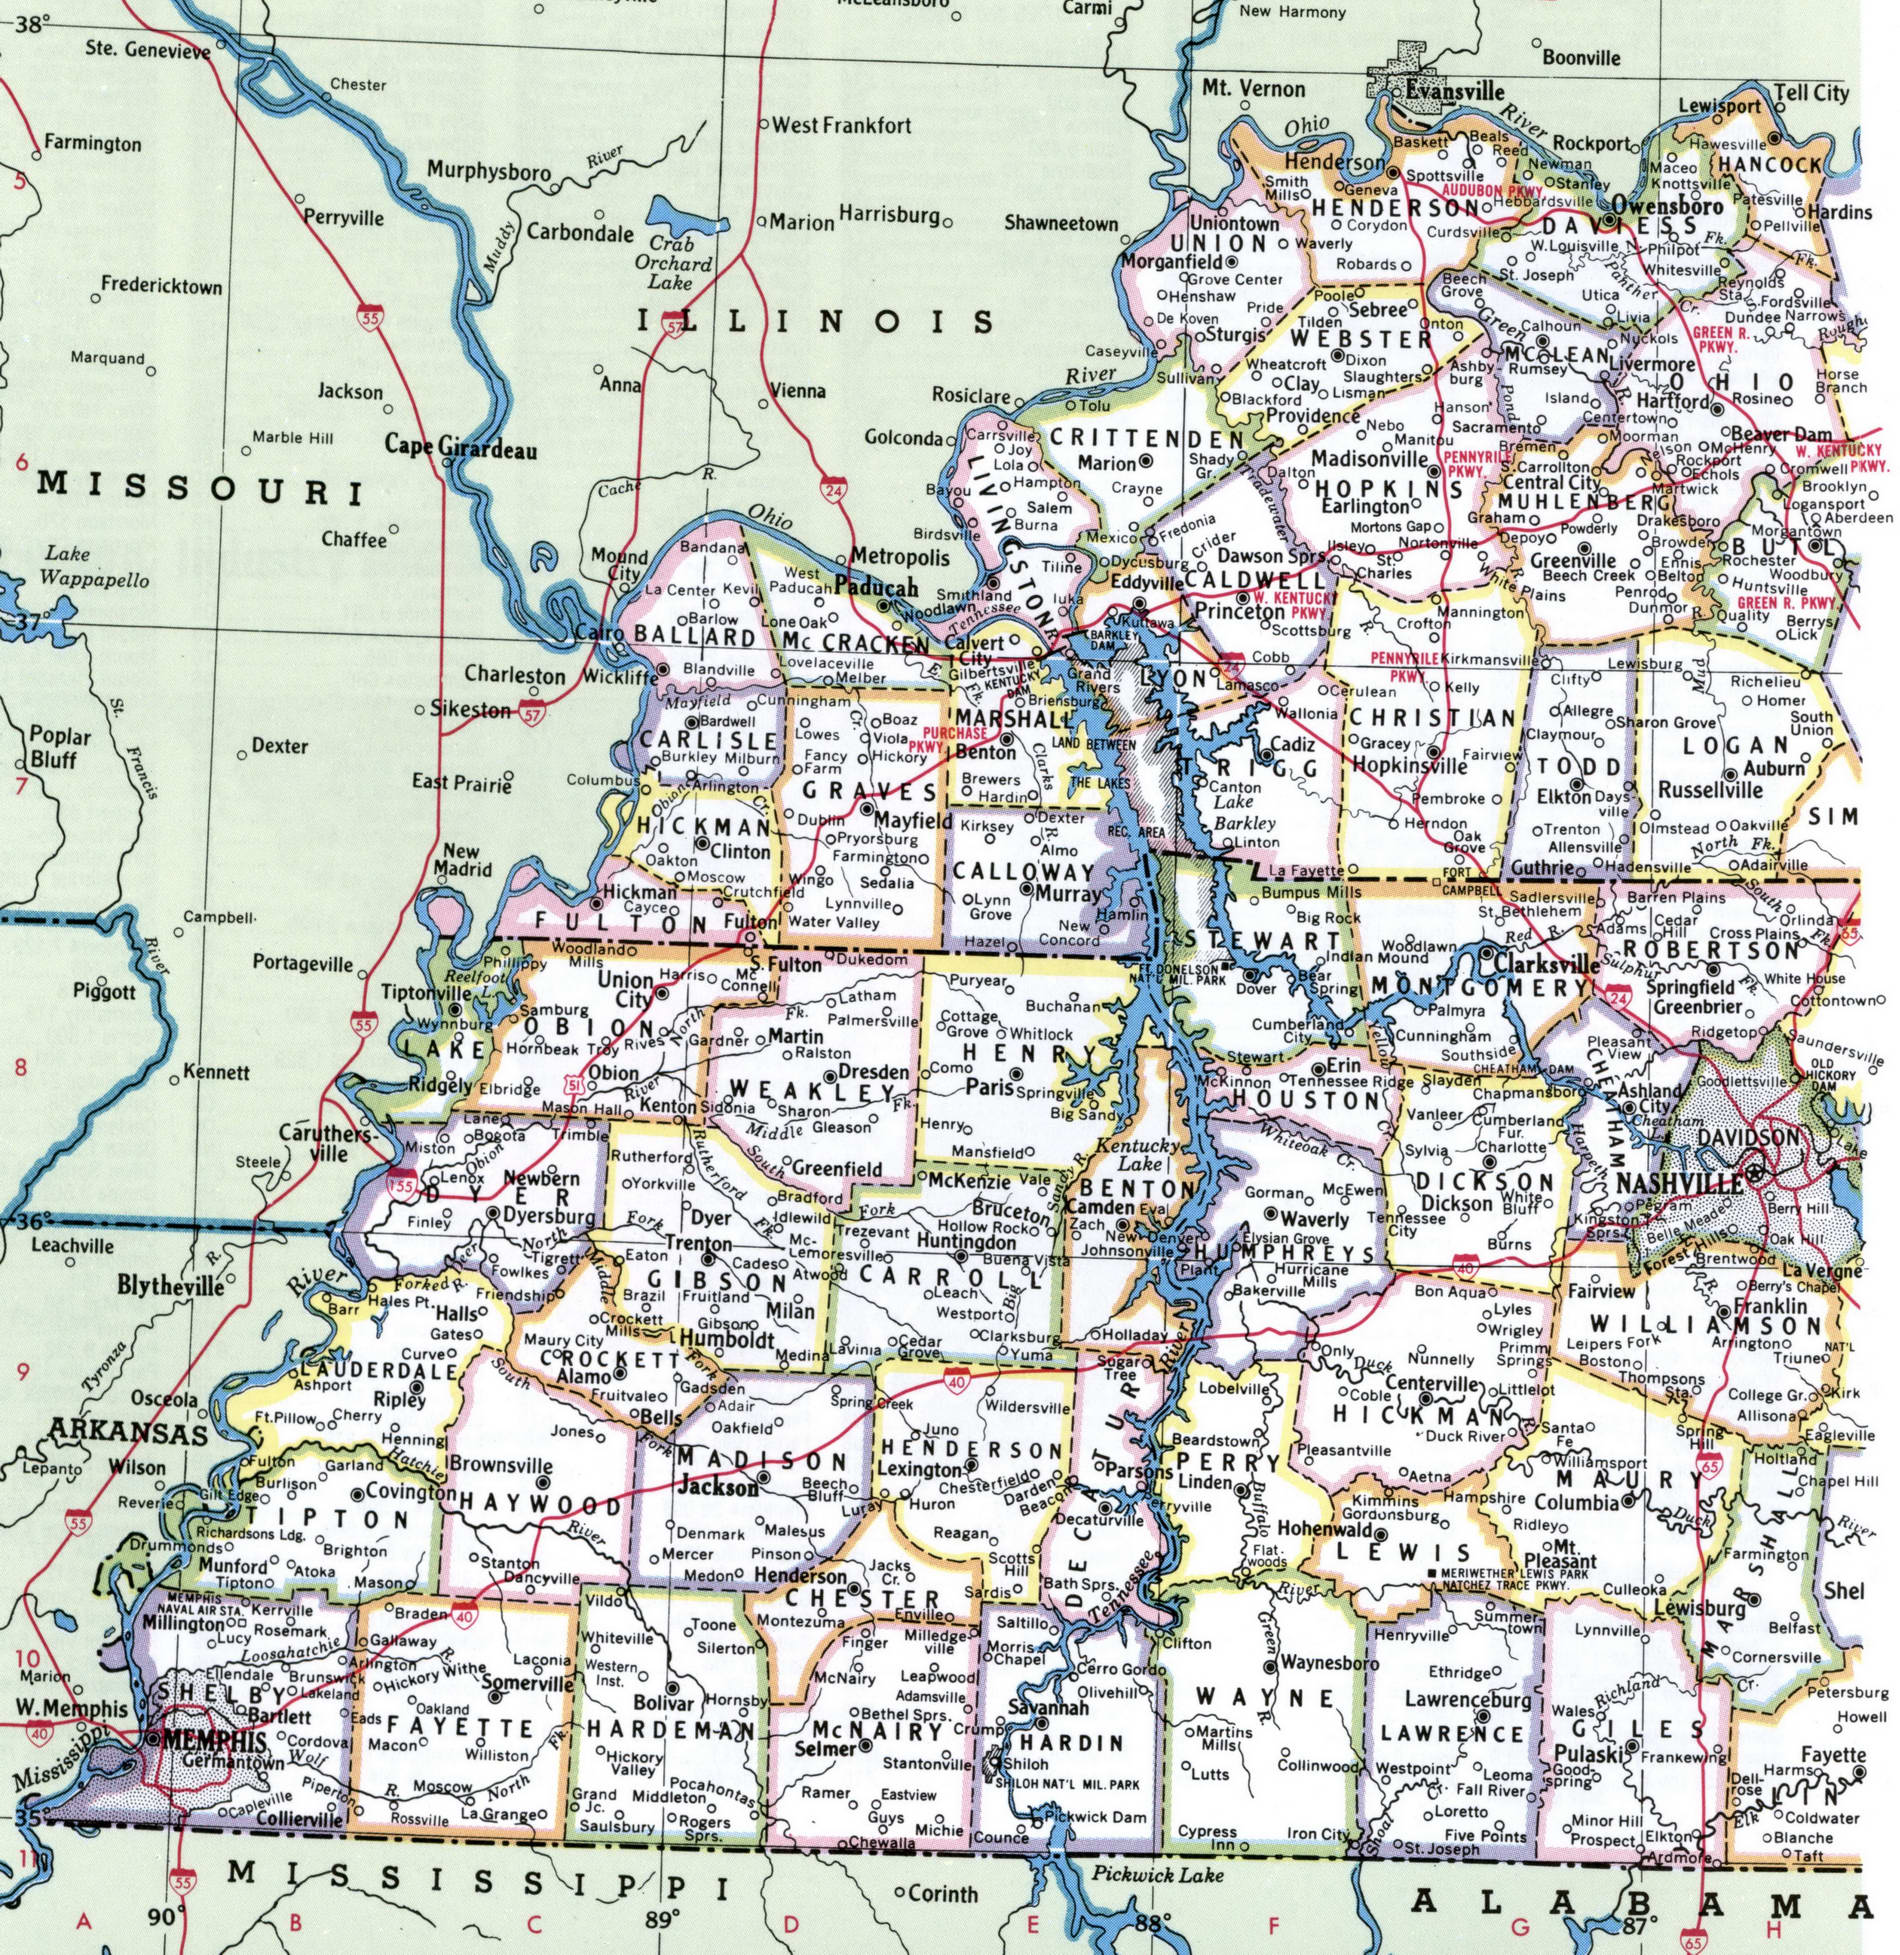 map-of-kentucky-showing-county-with-cities-road-highways-counties-towns